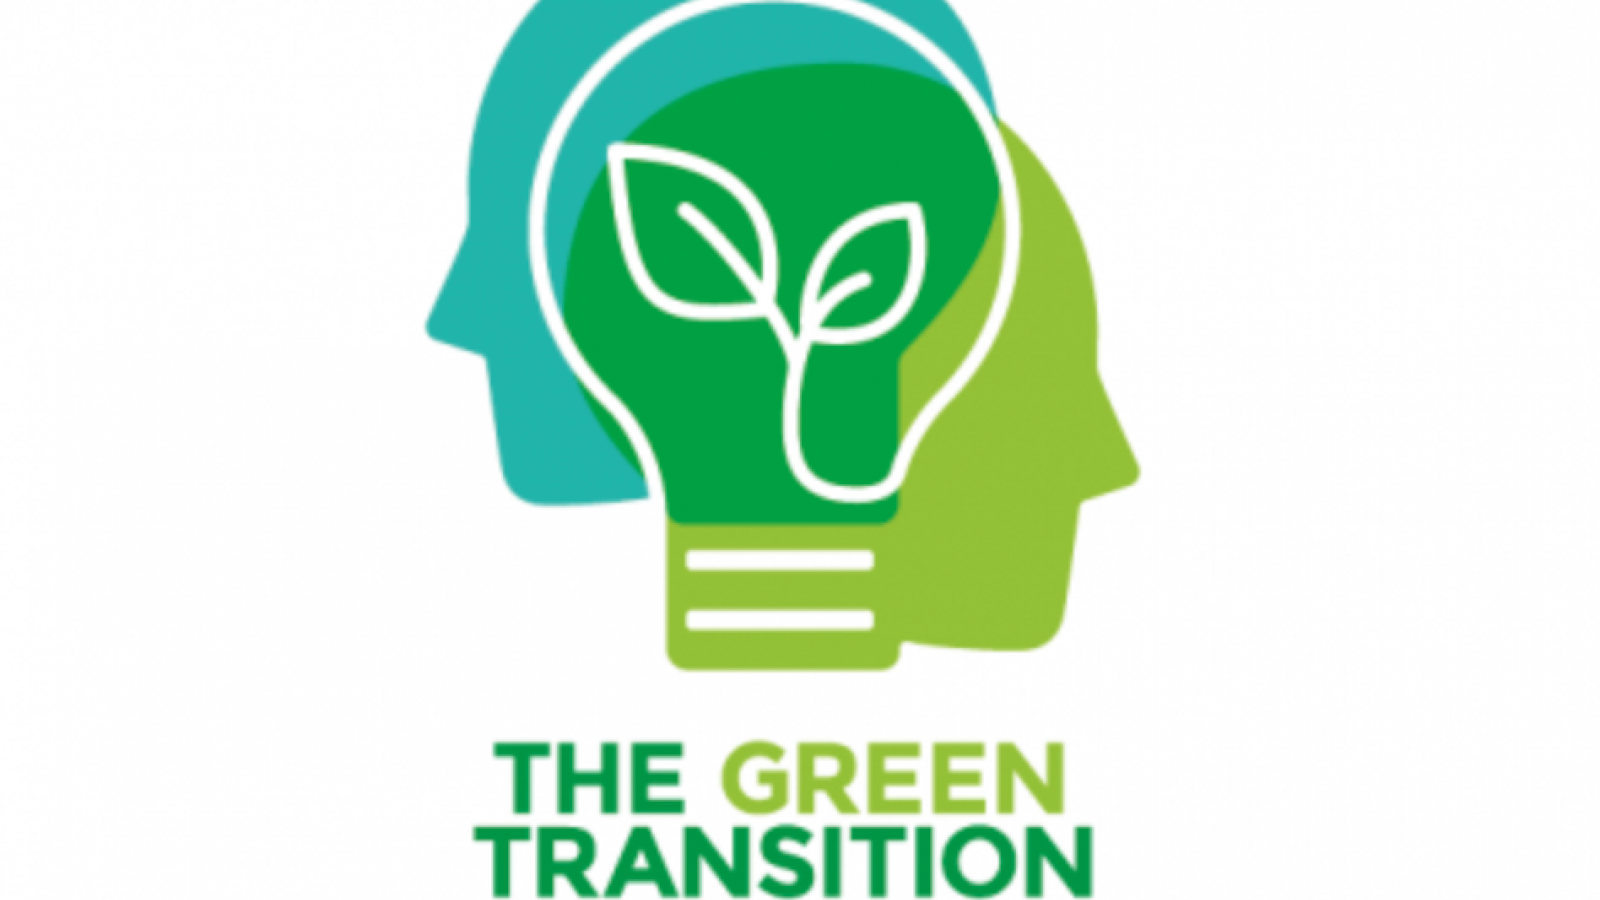 European Training Foundation extends deadline for call showcasing role of skills in green transition